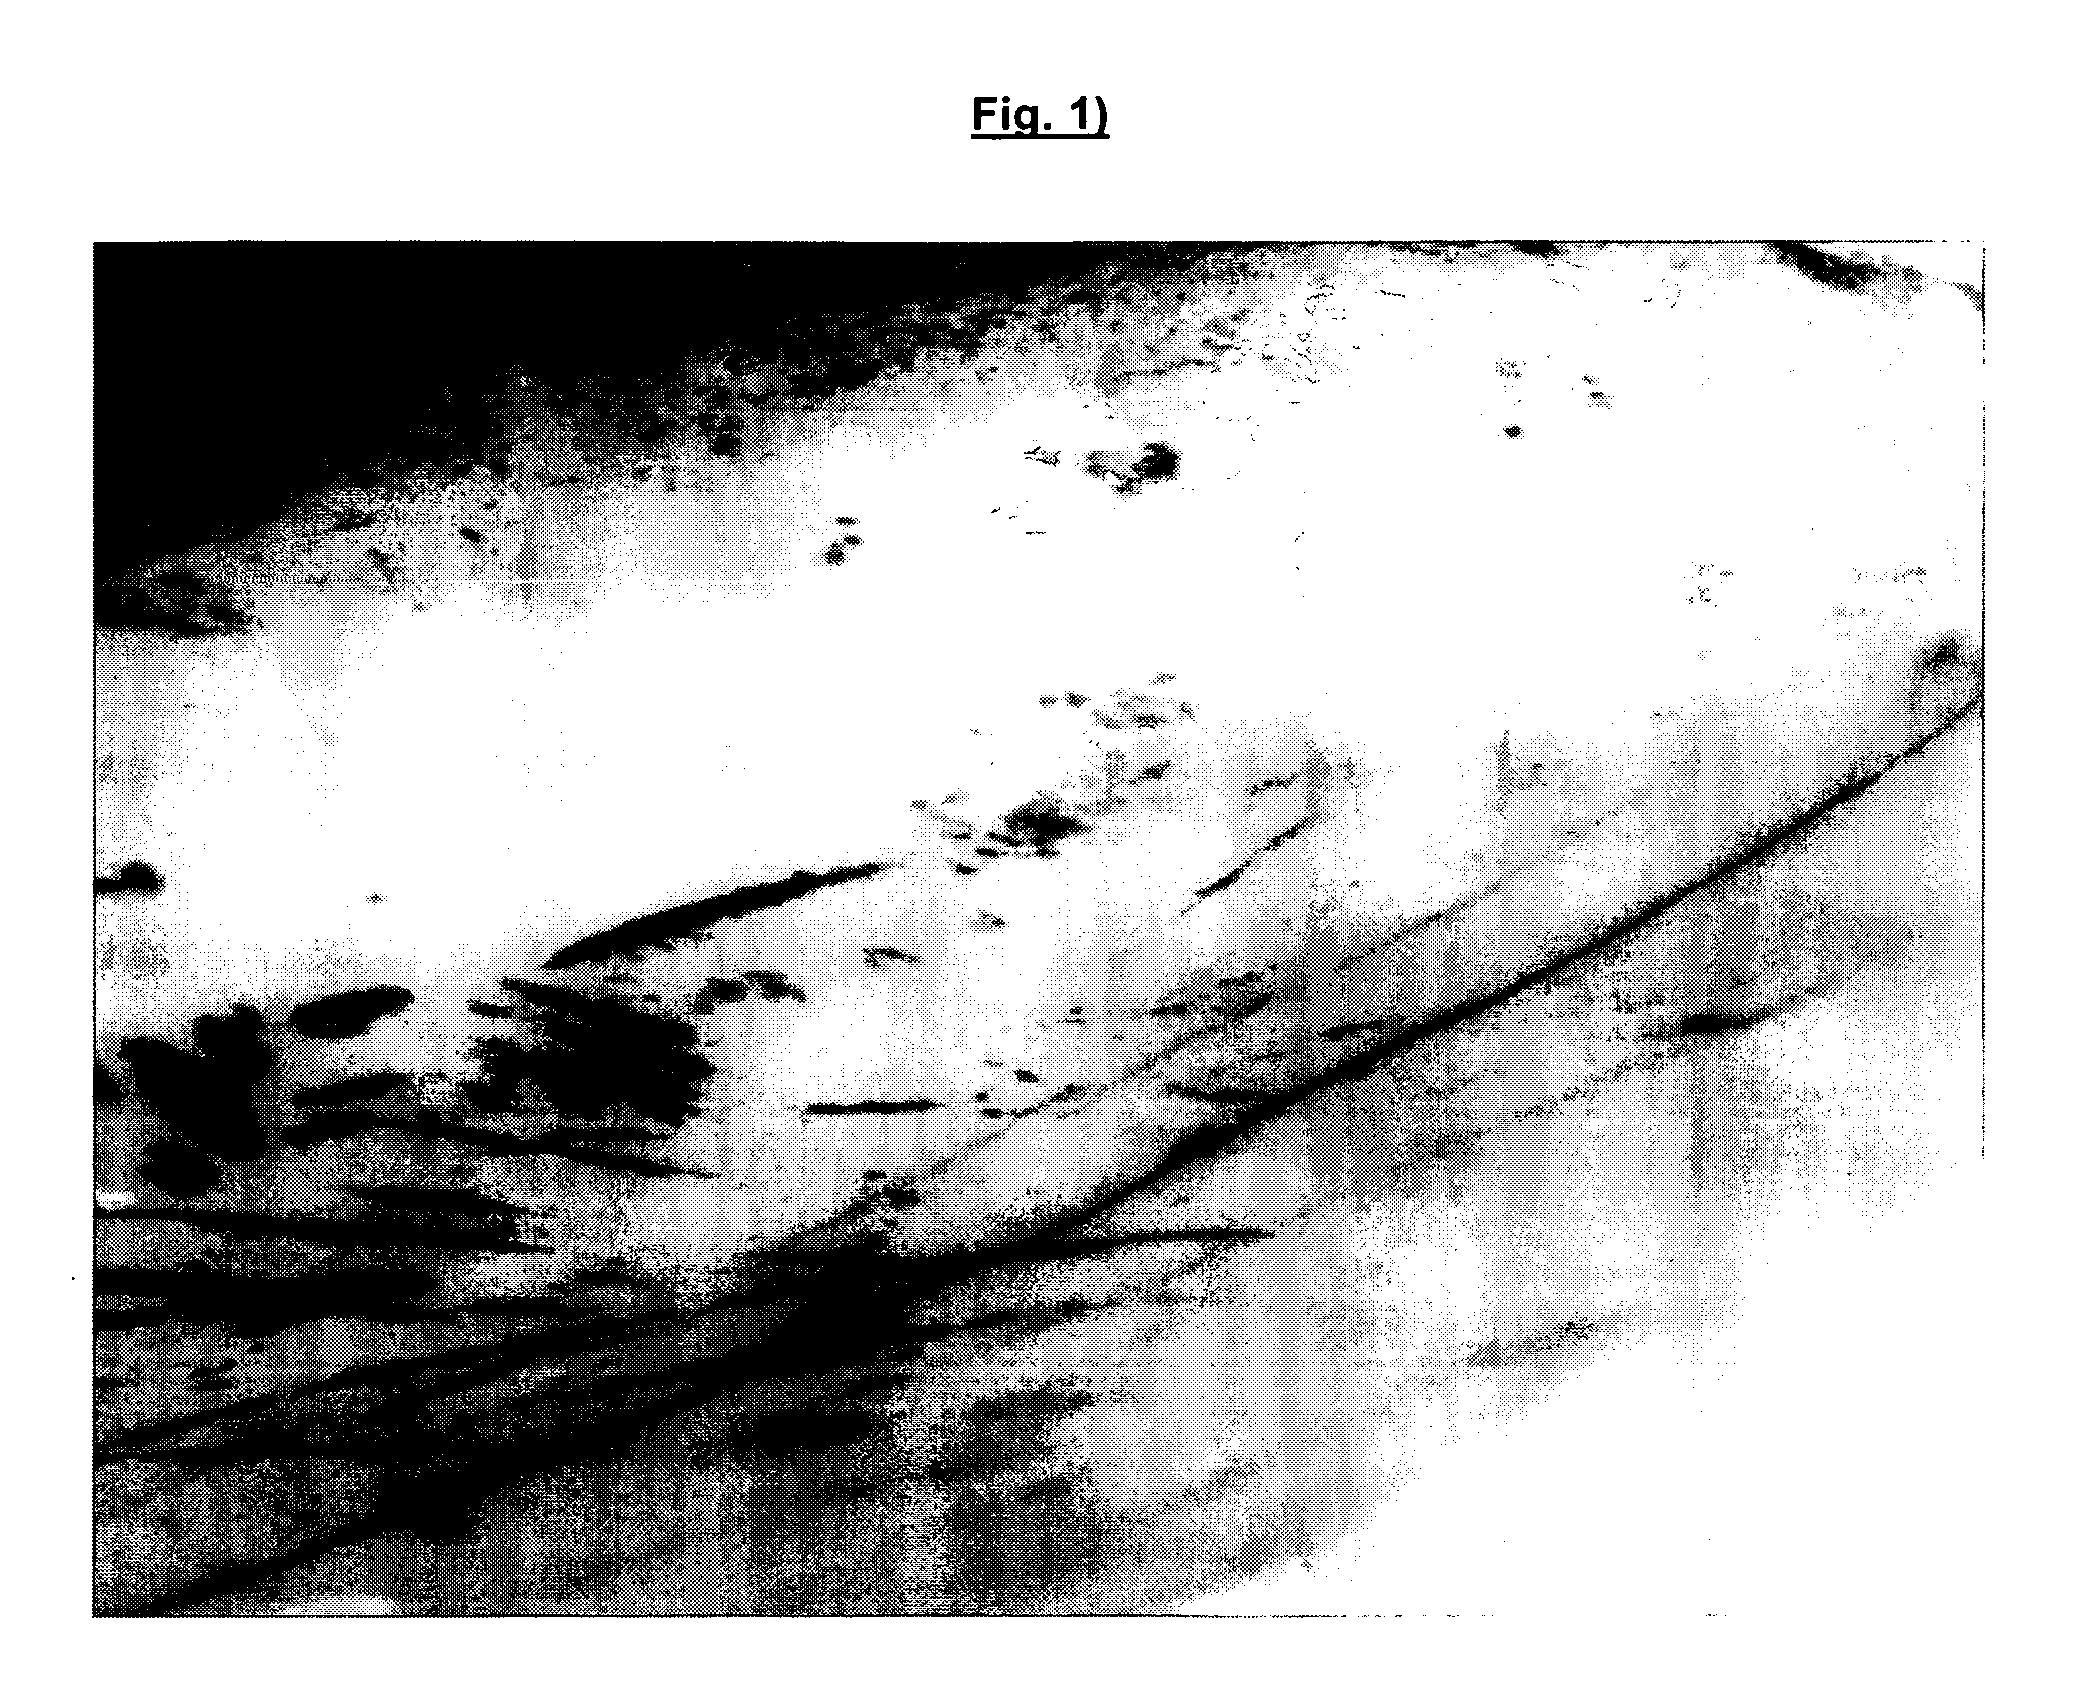 Compositions for dental treatment comprising lipoteichoic acids or parts thereof like mono- or polyglycerphosphates